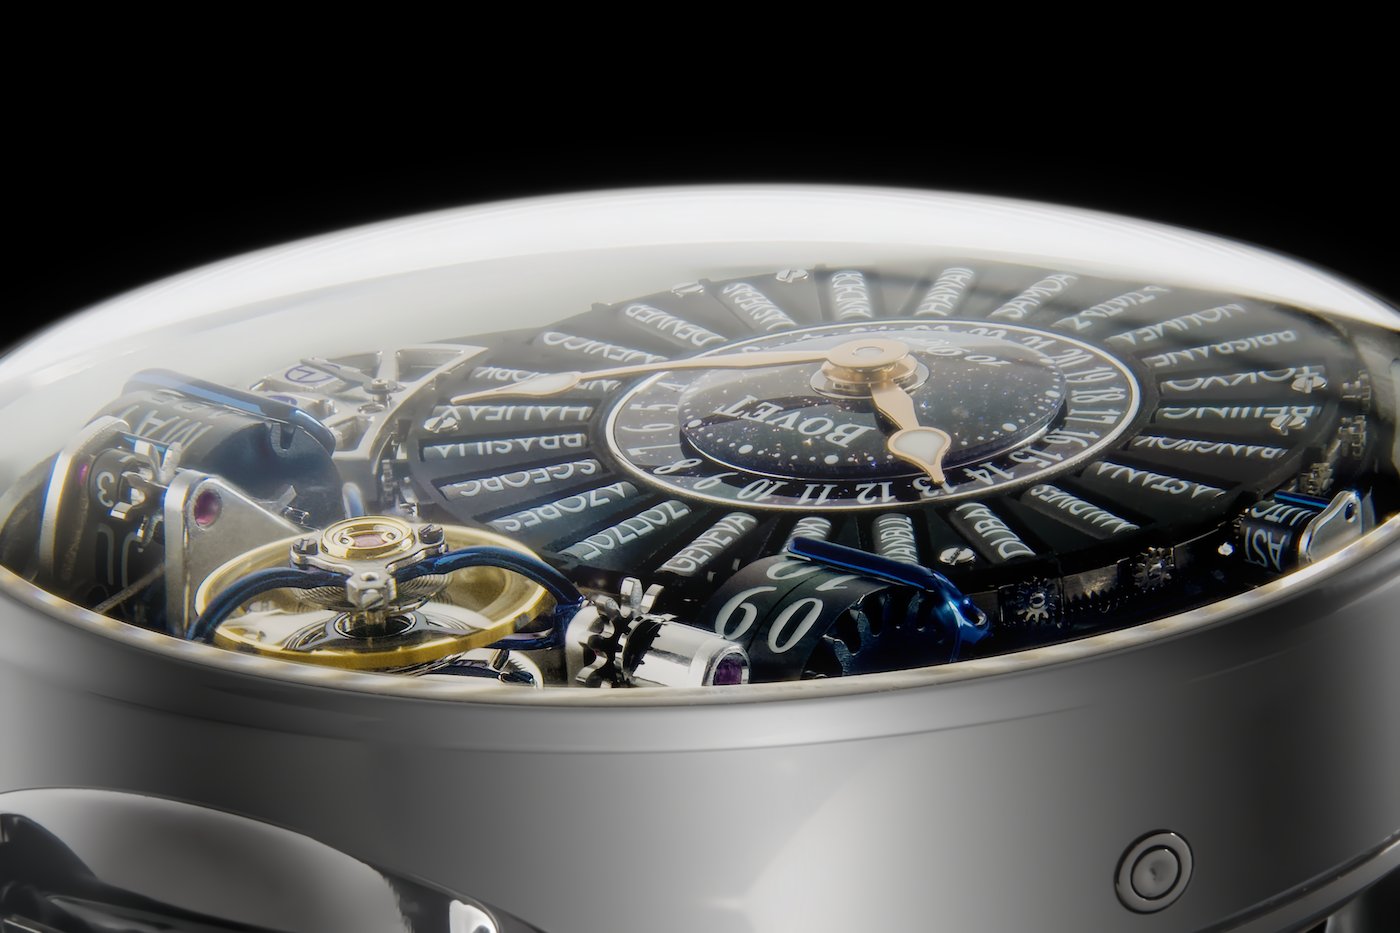 Bovet Récital 28 “Prowess 1” represents a breakthrough in (...)